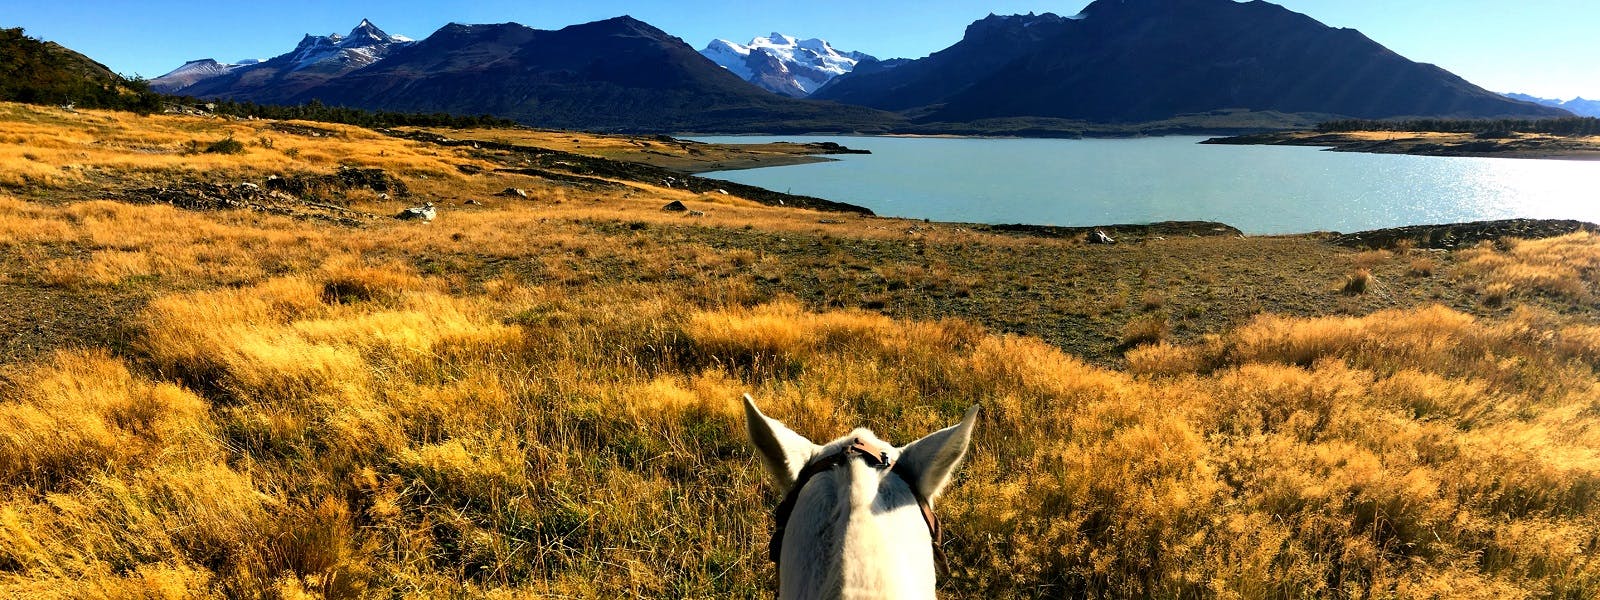 Horse and mountains in Argentina's Lake District